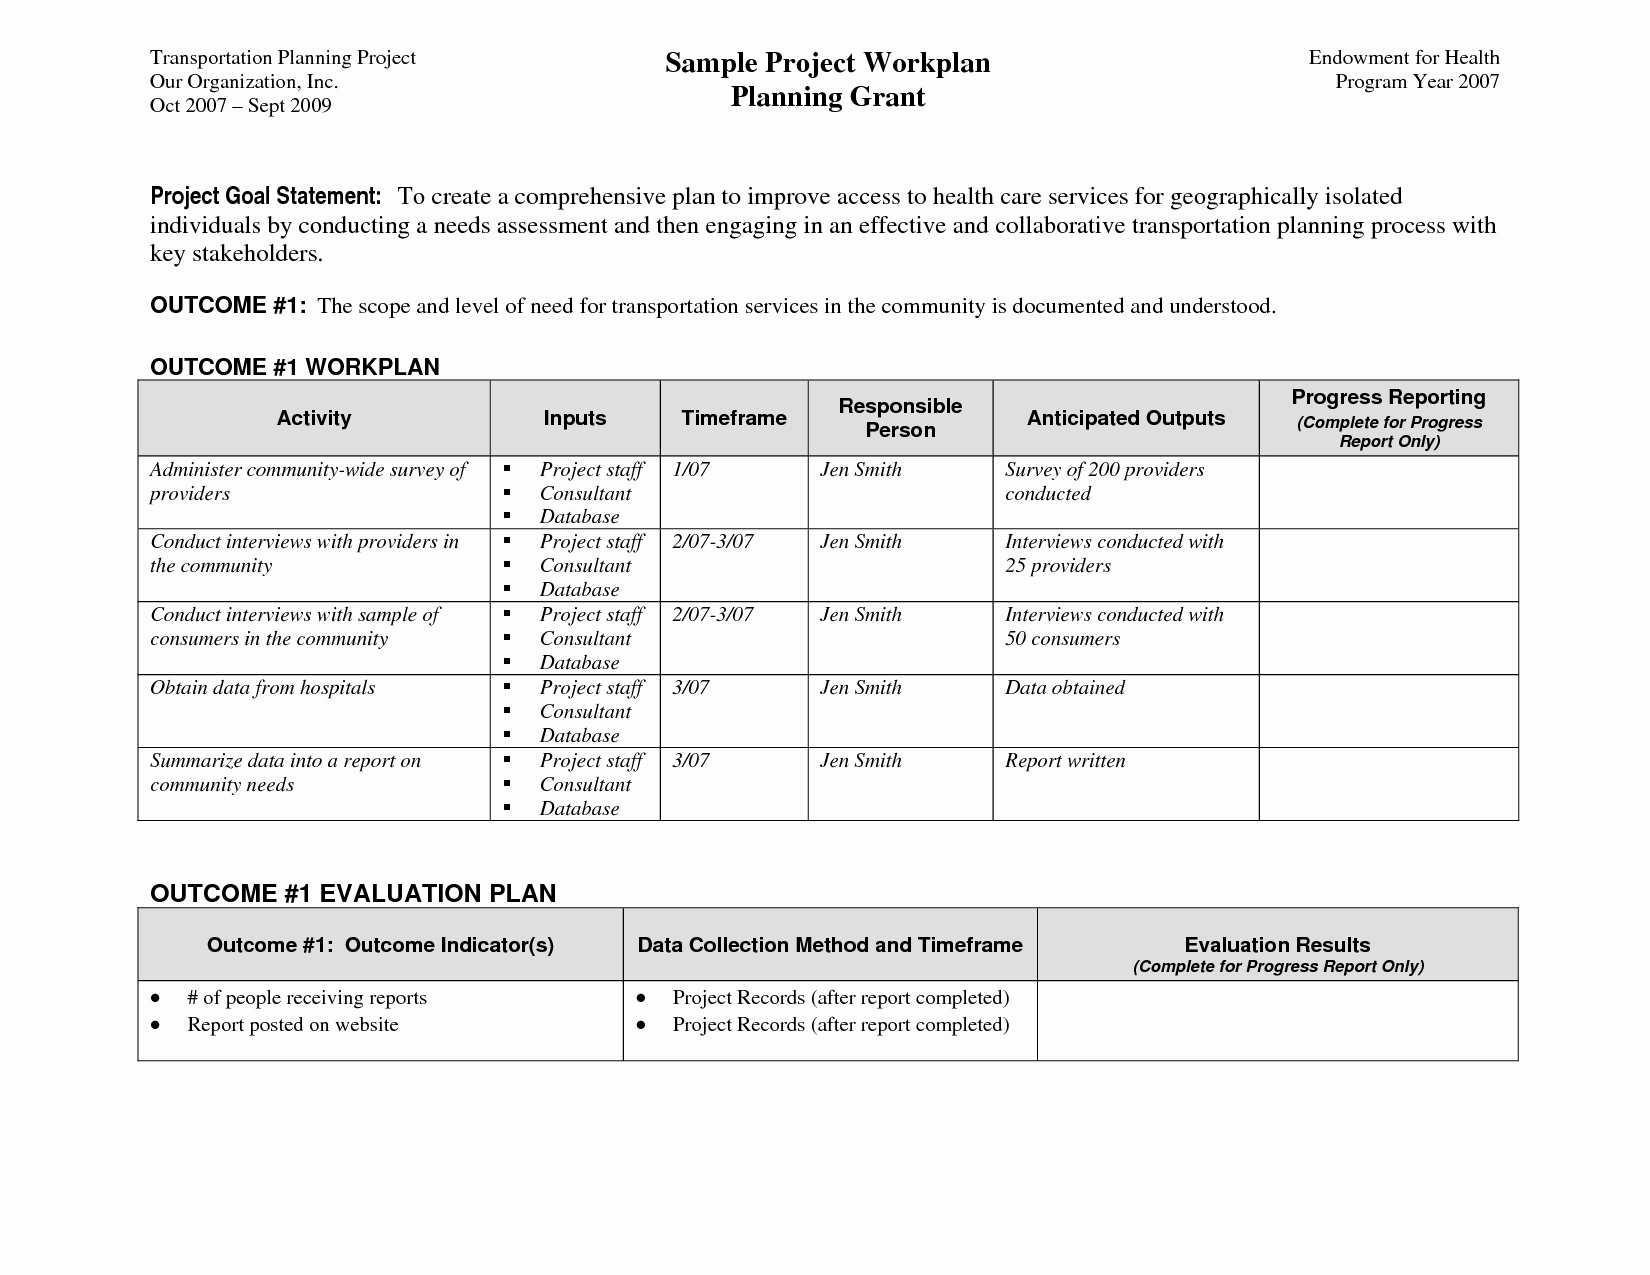 Project Work Plan Template Awesome Best S Of Project Work Plan Examples Project Work